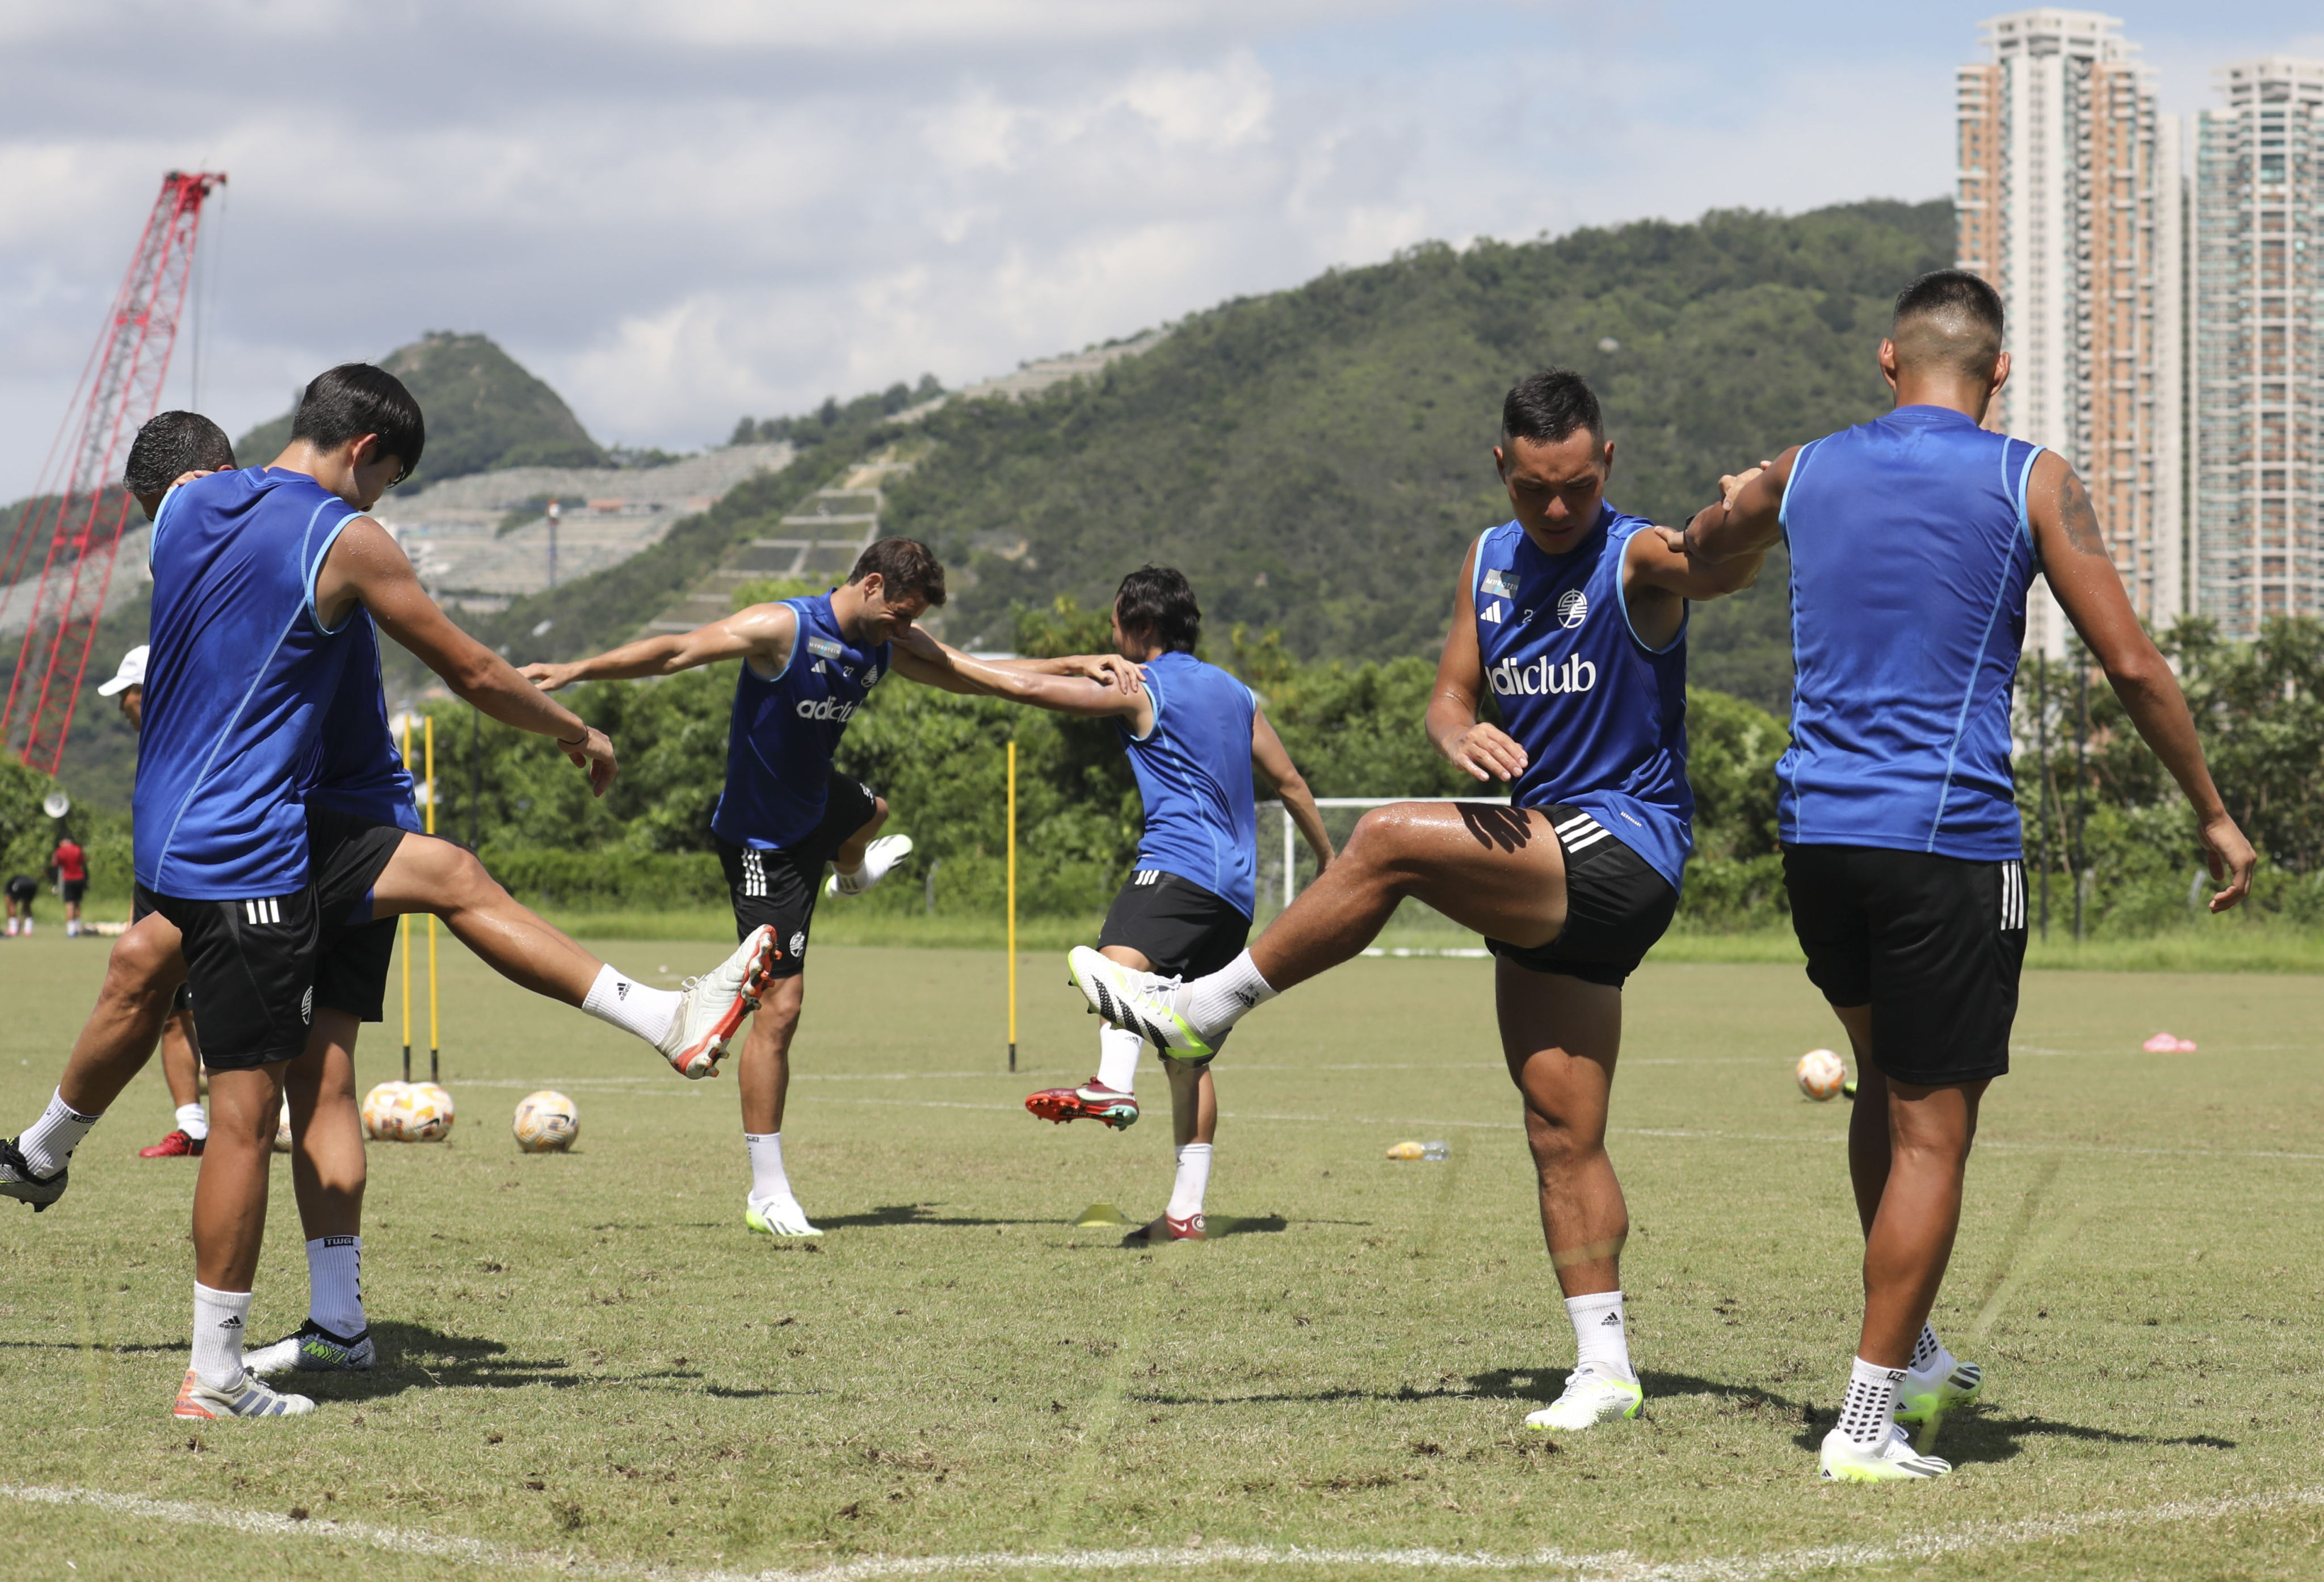 Eastern players warm up during a training session in Tseung Kwan O. Photo: Xiaomei Chen